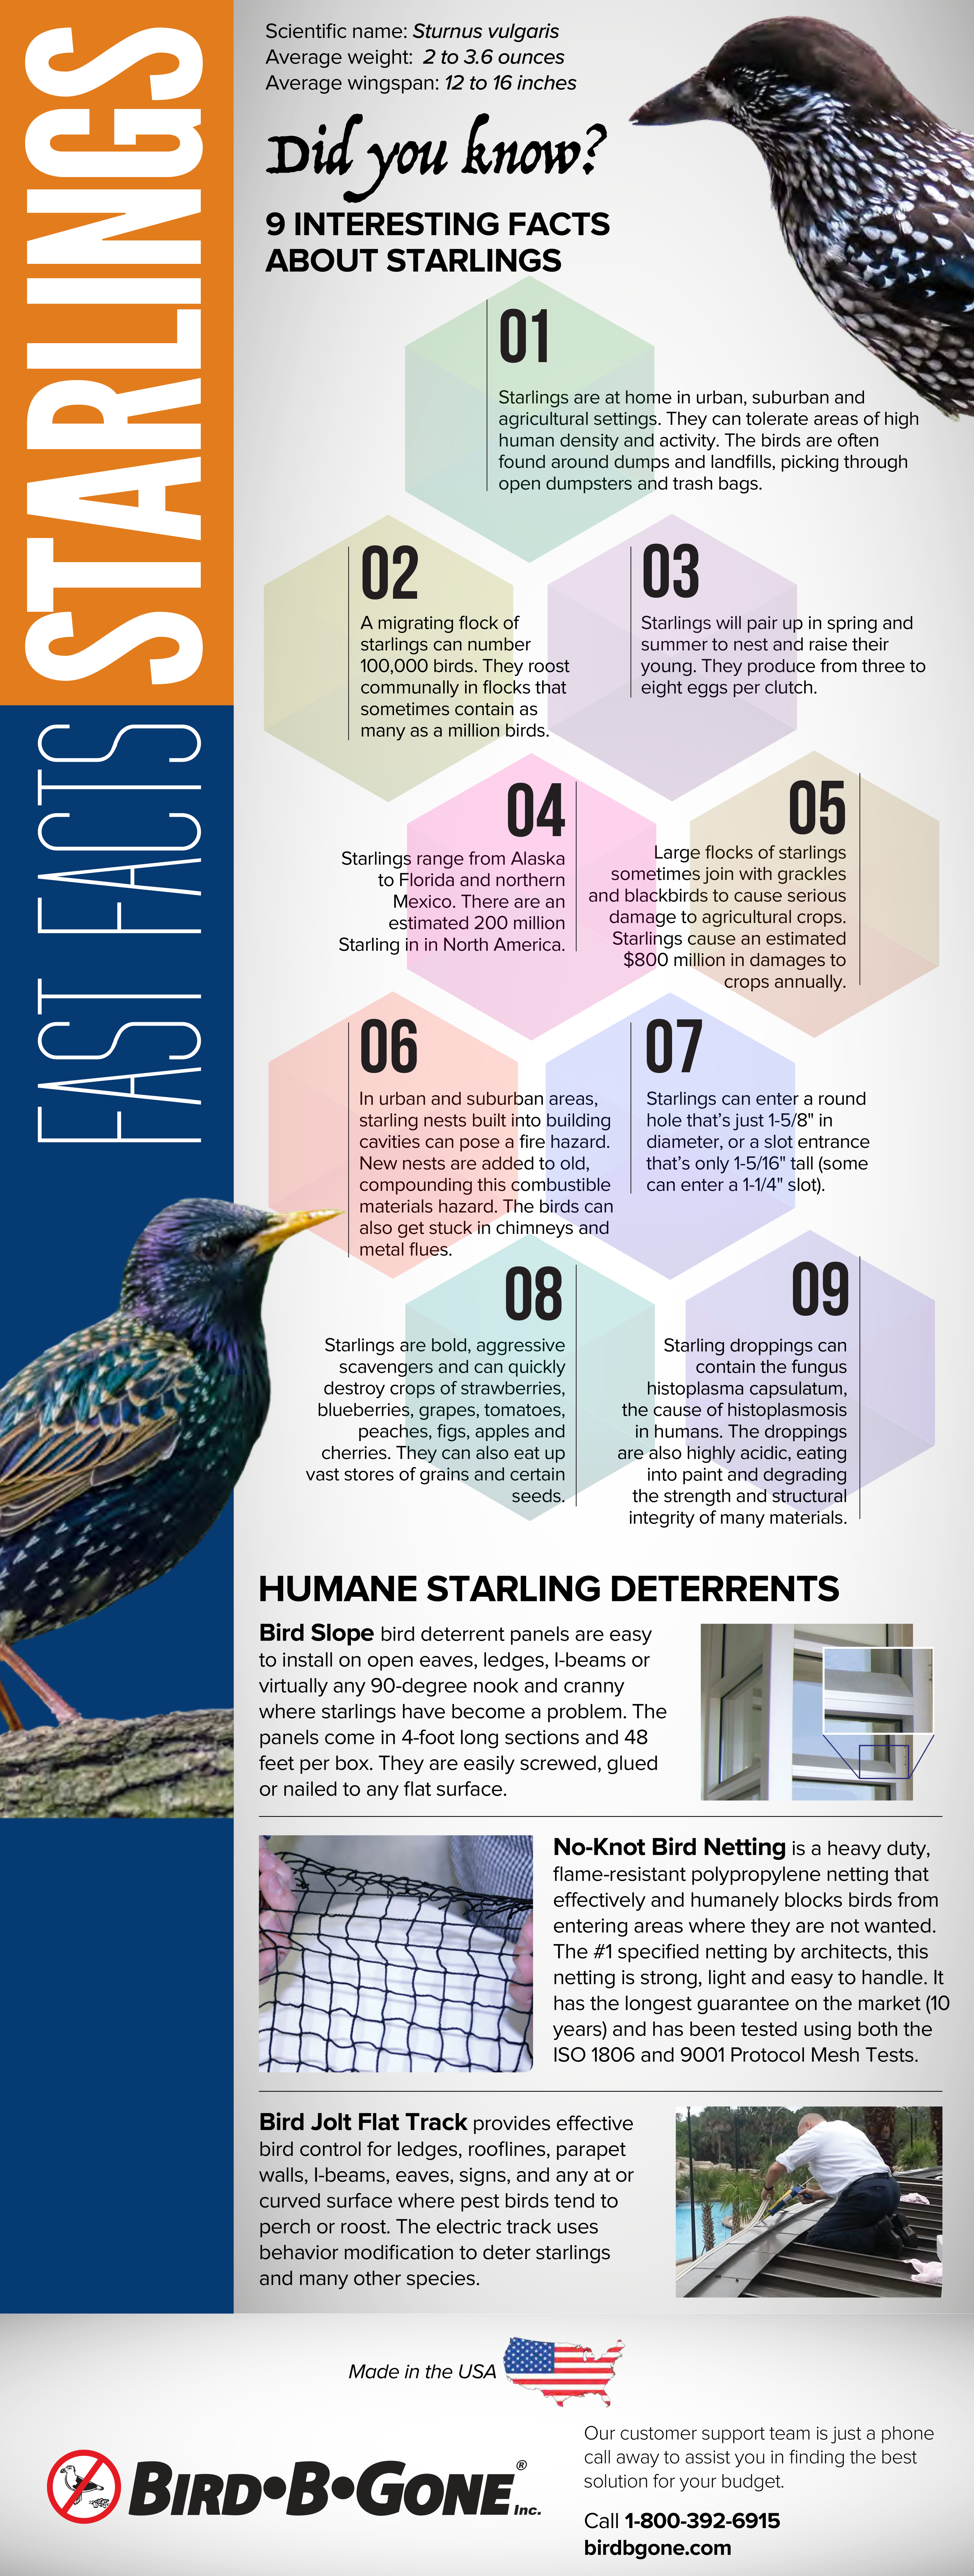 9 interesting facts about starlings infographic 